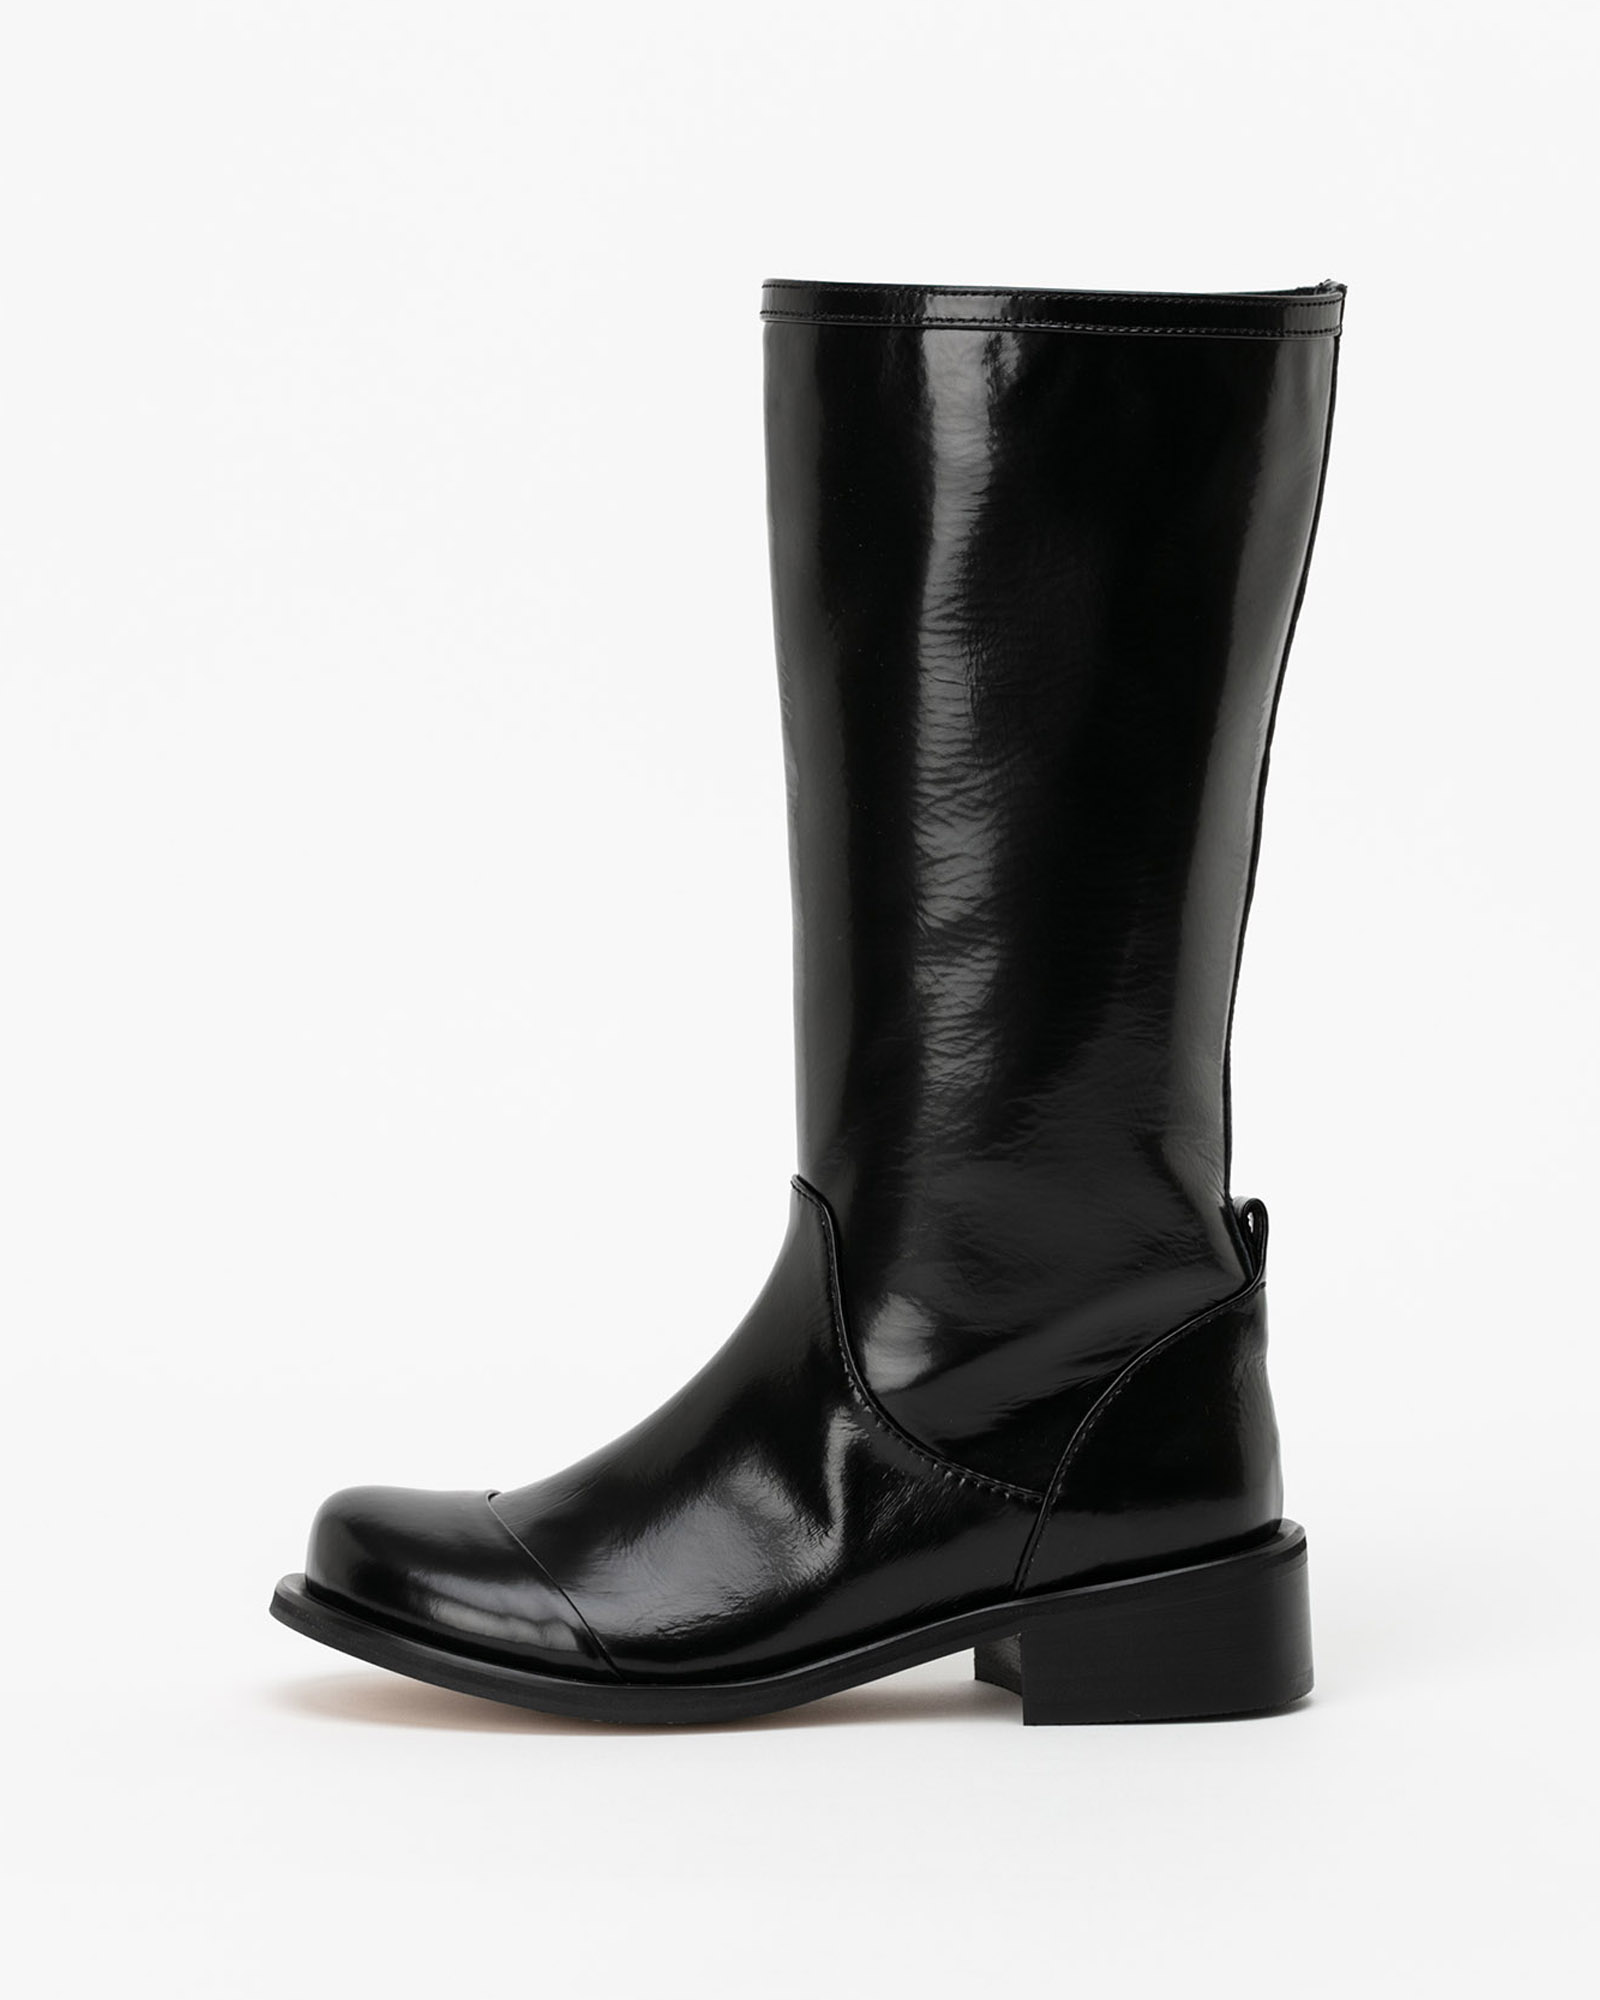 Articura Boots in Wrinkled Black Box